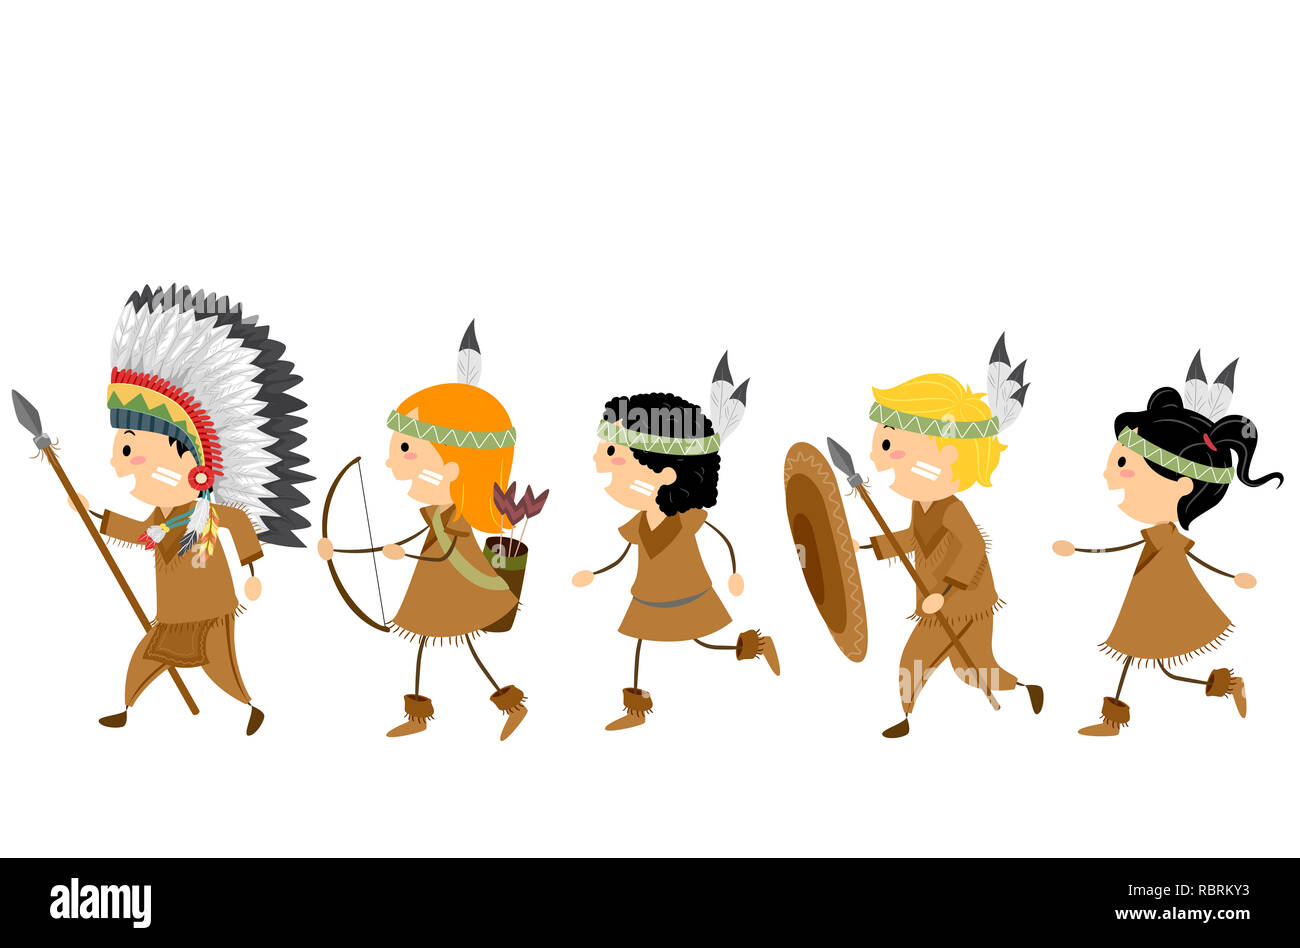 Illustration of Native American Stickman Kids Holding a Spear, Bow, Arrow and Shield Walking to the Left Stock Photo